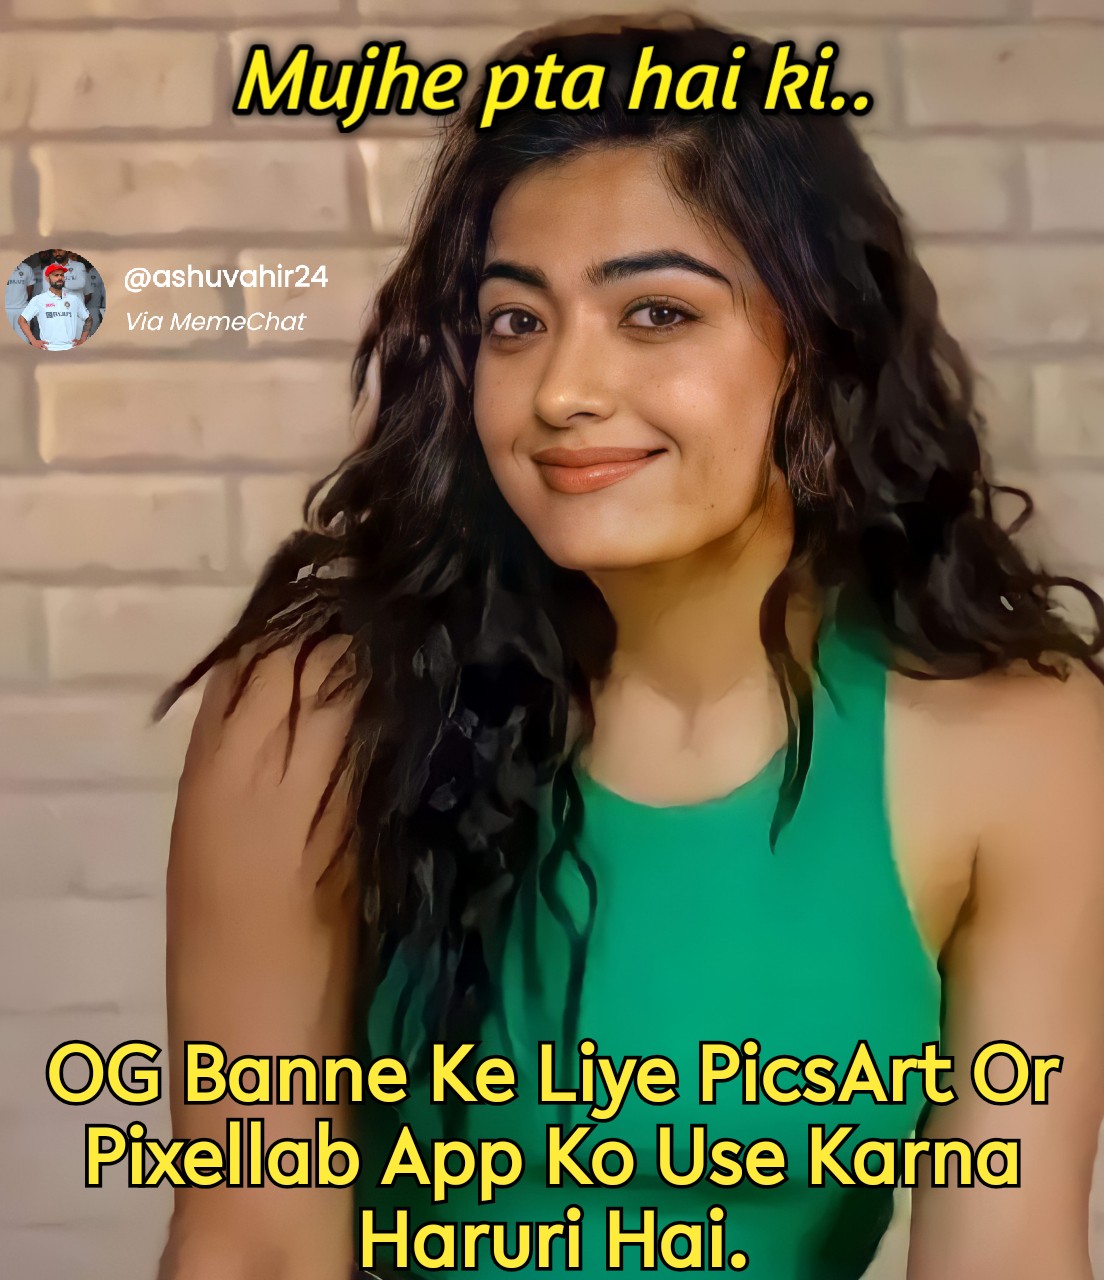 Make Memes On Phone - How to Make Memes with Text and Picture in Pixellab, Hindi